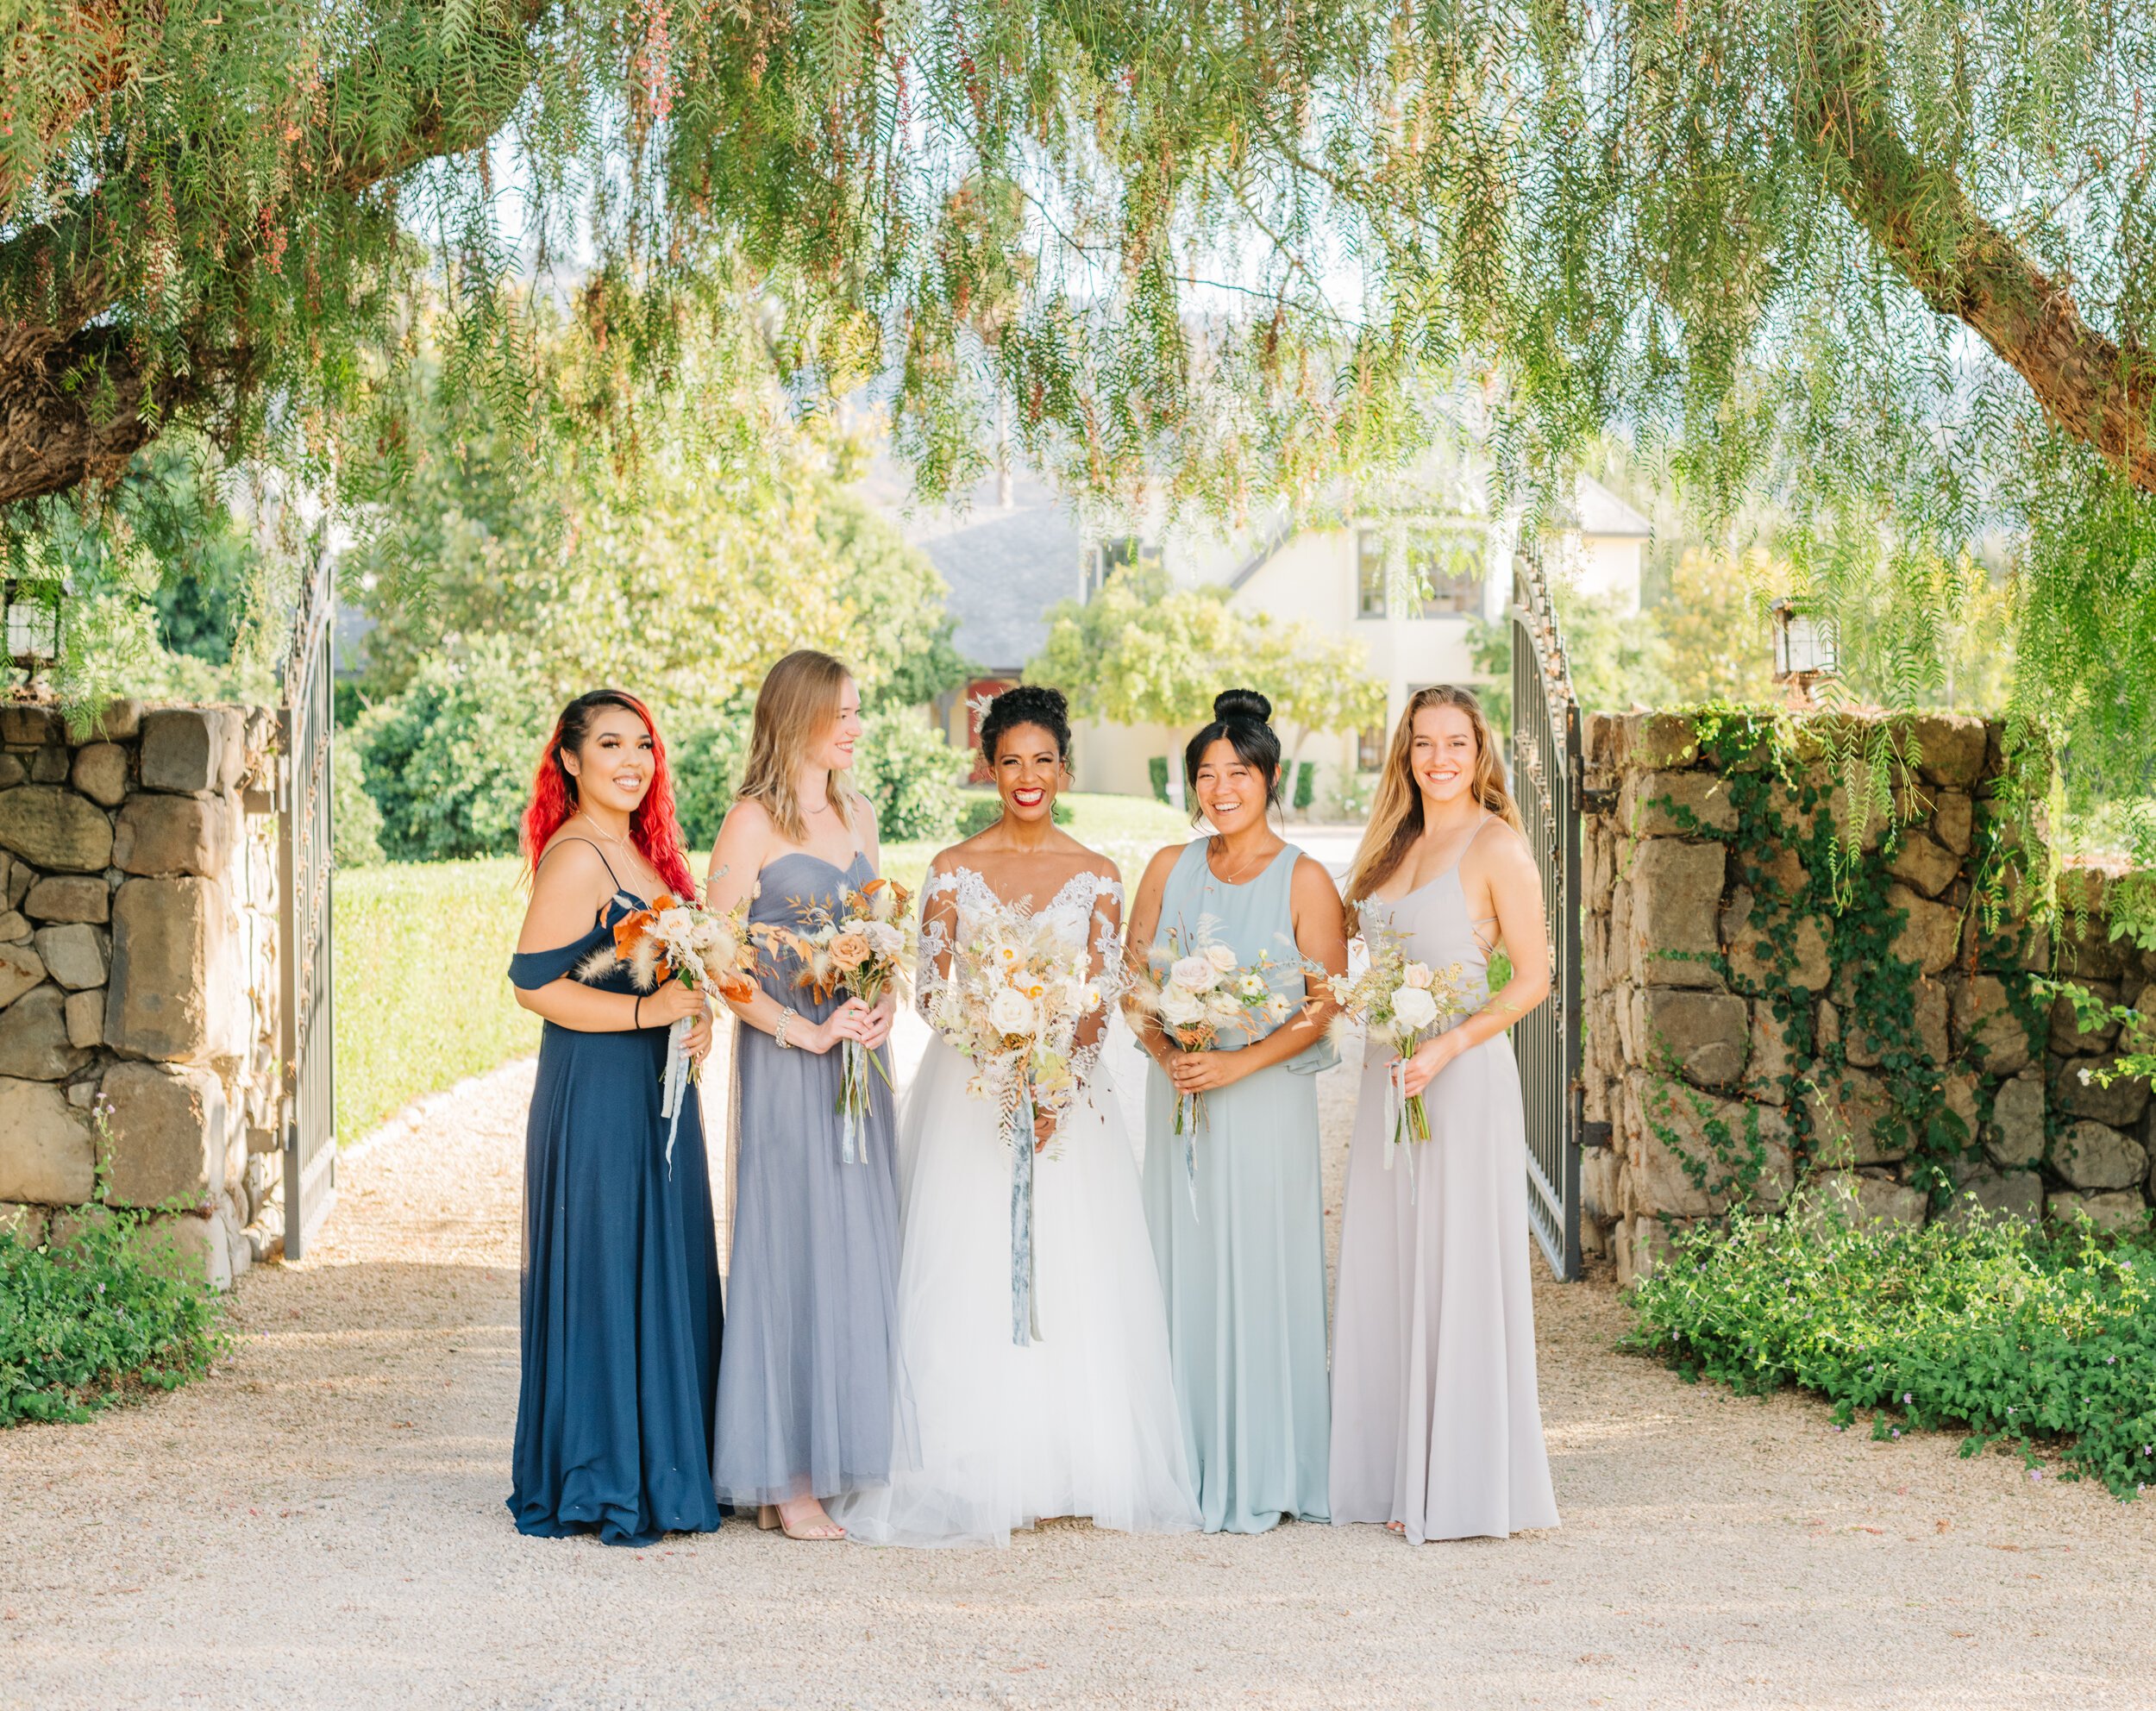 www.santabarbarawedding.com | White Sage Wedding &amp; Events | Cara Robbins Studio | Rogue Styling | Ojala Floral | Styled Bride and Bridesmaids in Shades of Blue